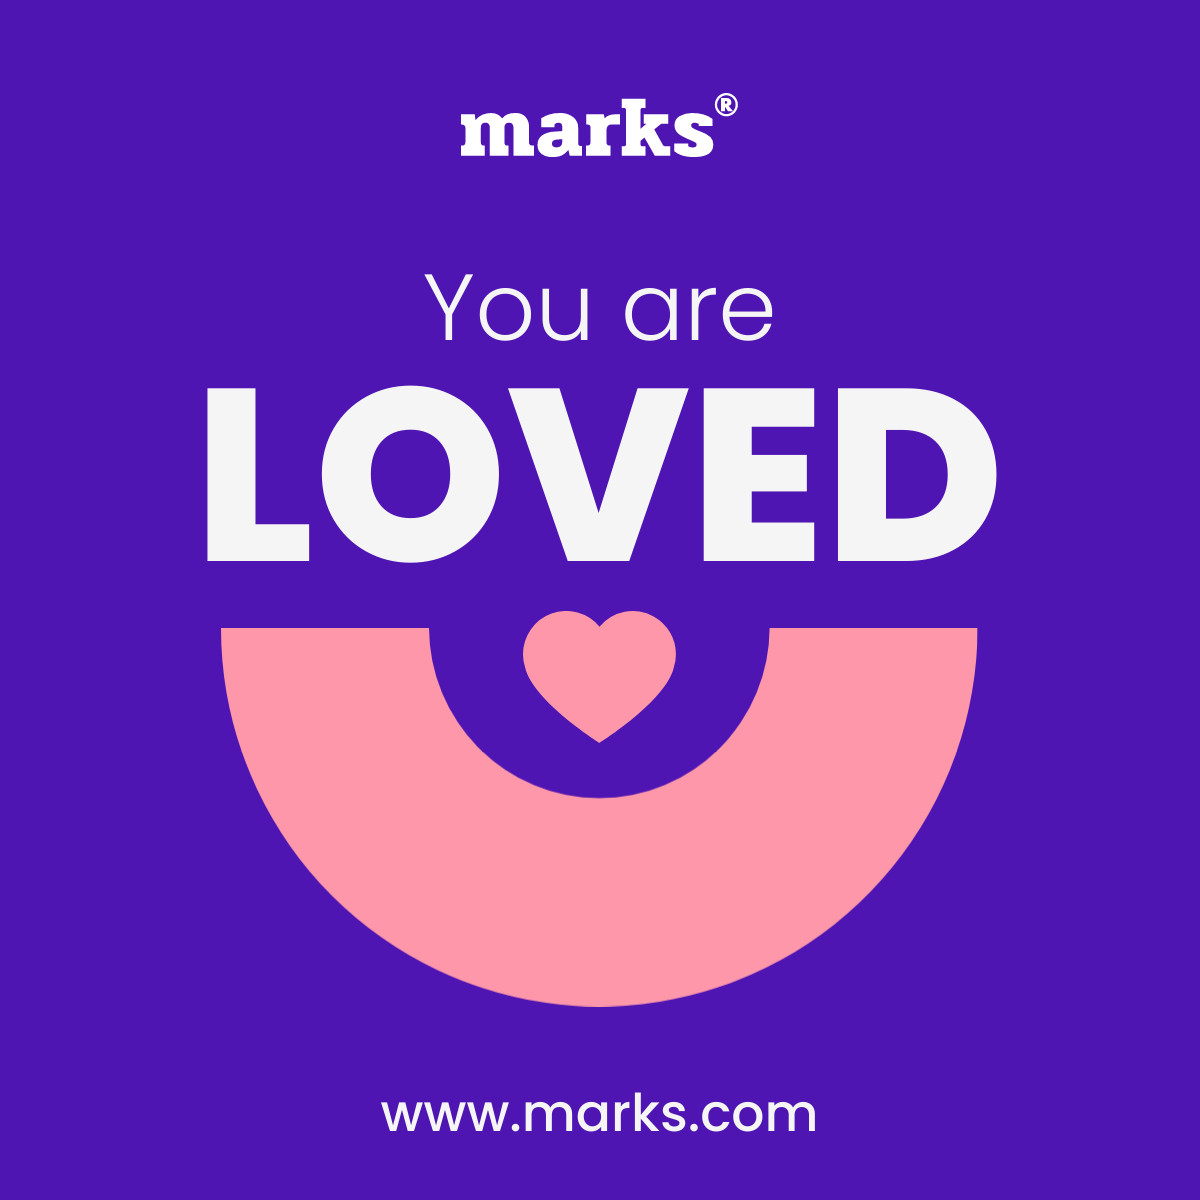 Marks You Are Loved Valentine's Day Responsive Square Art 1200x1200